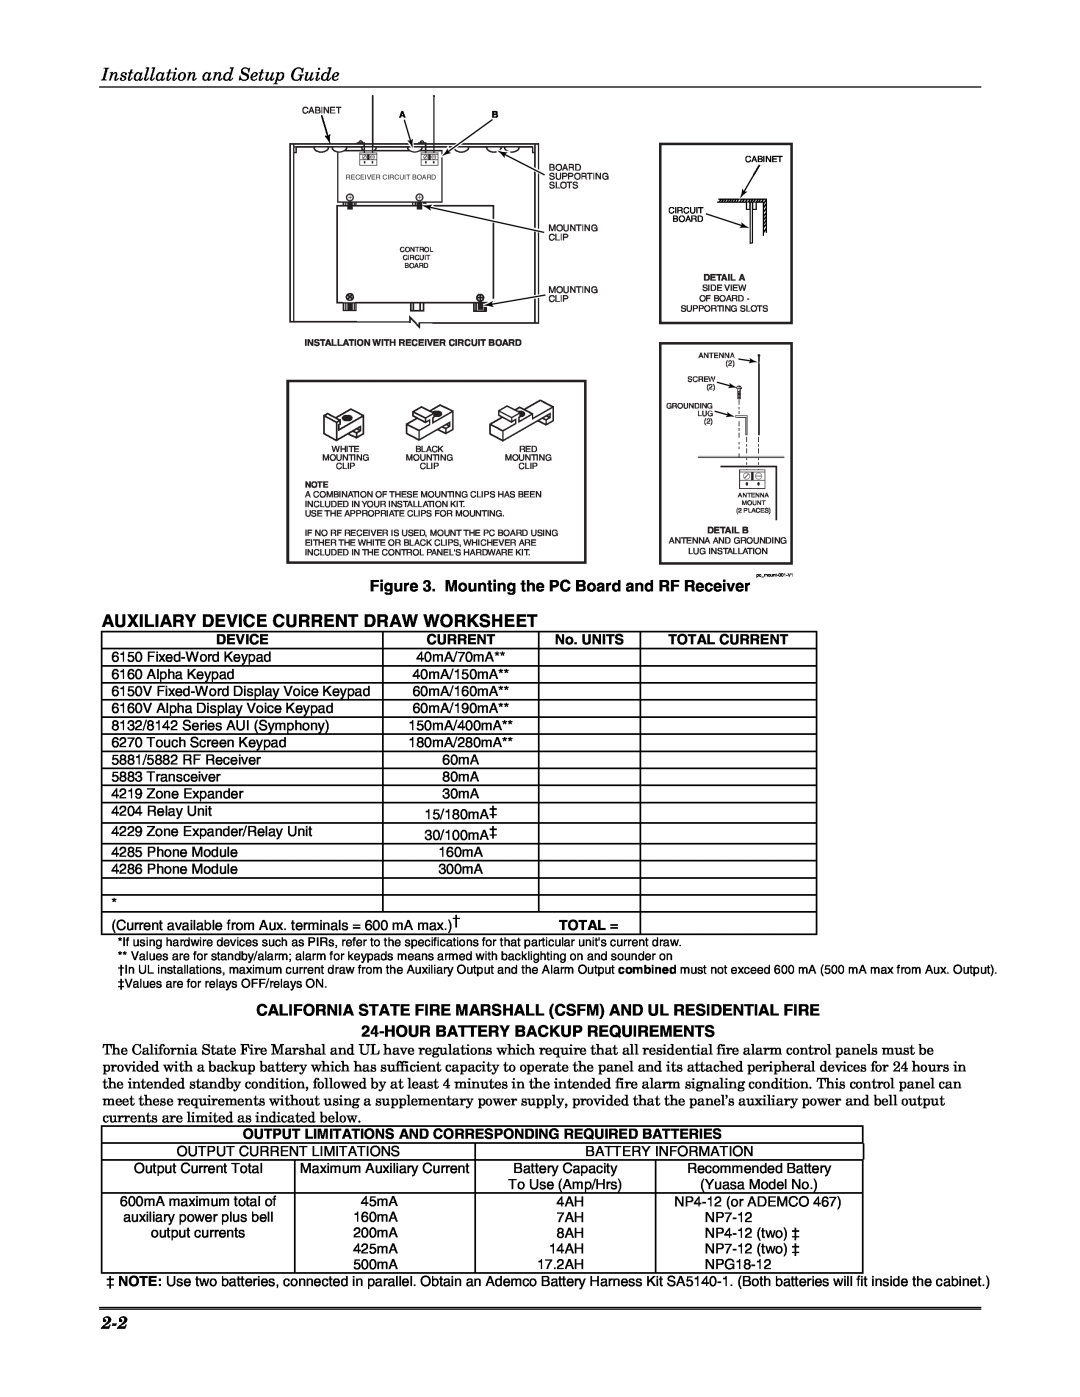 Honeywell K5305-1V5 Installation and Setup Guide, Auxiliary Device Current Draw Worksheet, Hourbattery Backup Requirements 